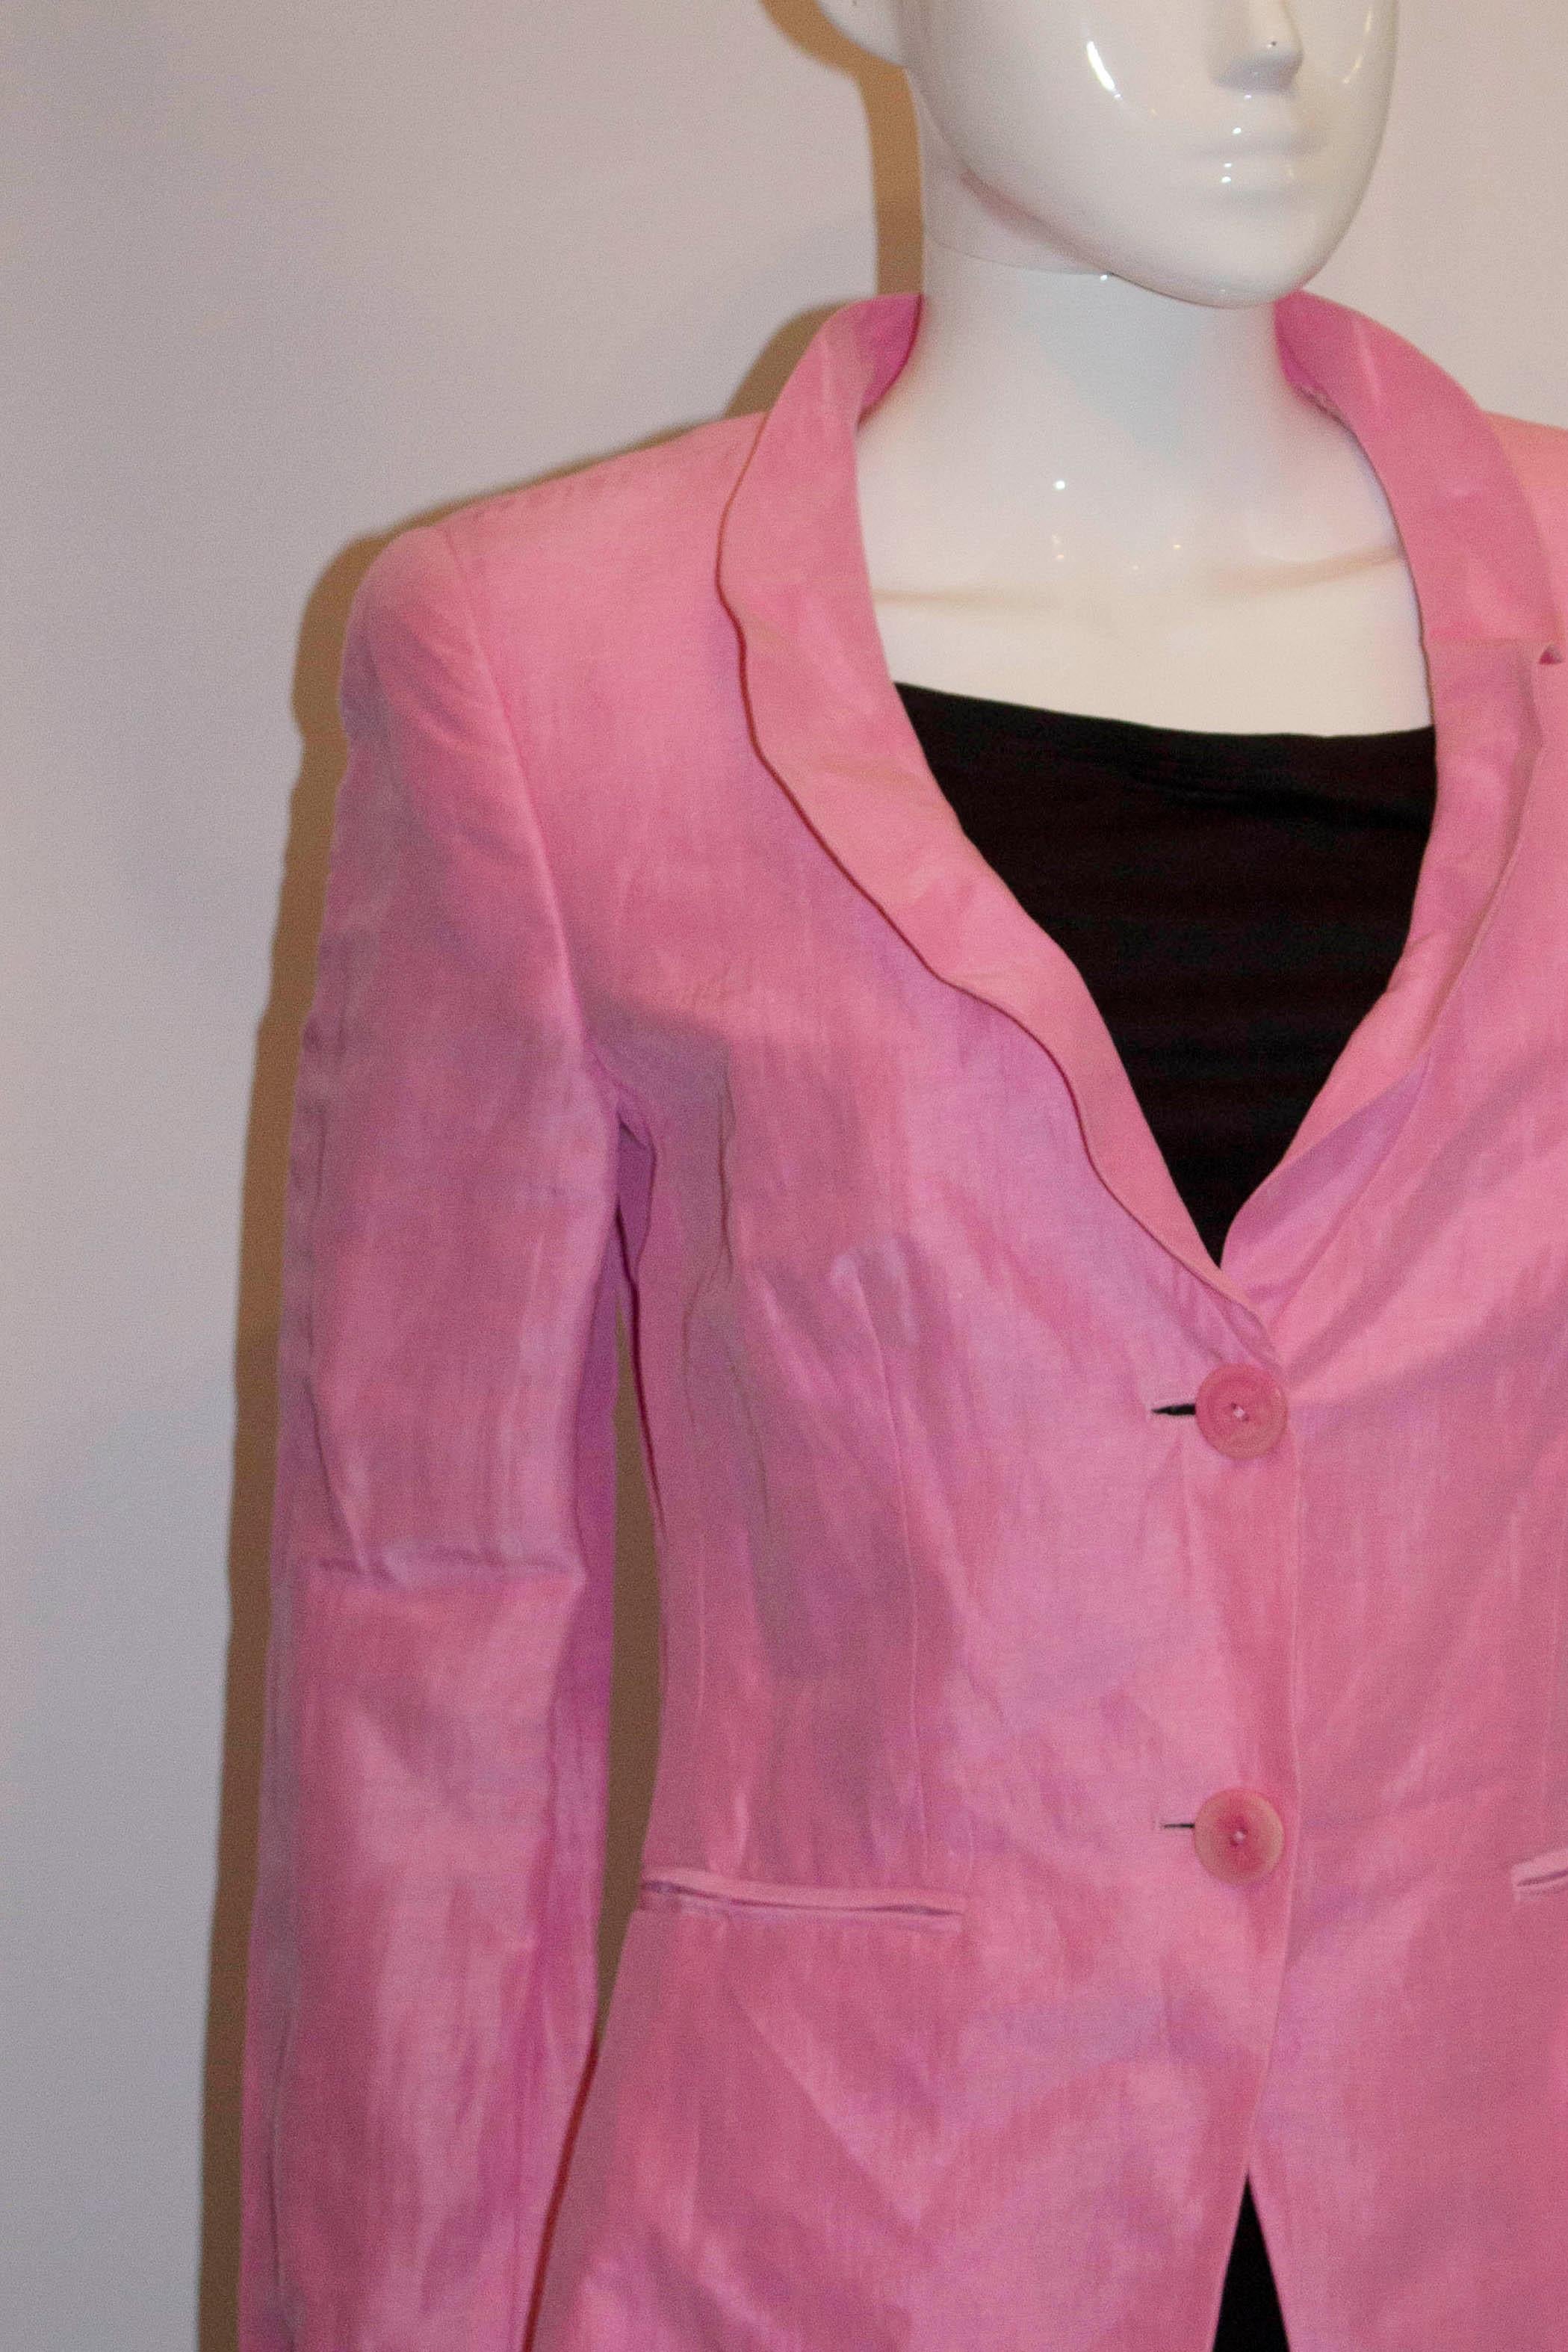 Vintage Giorgio Armani Pink Jacket In Good Condition For Sale In London, GB